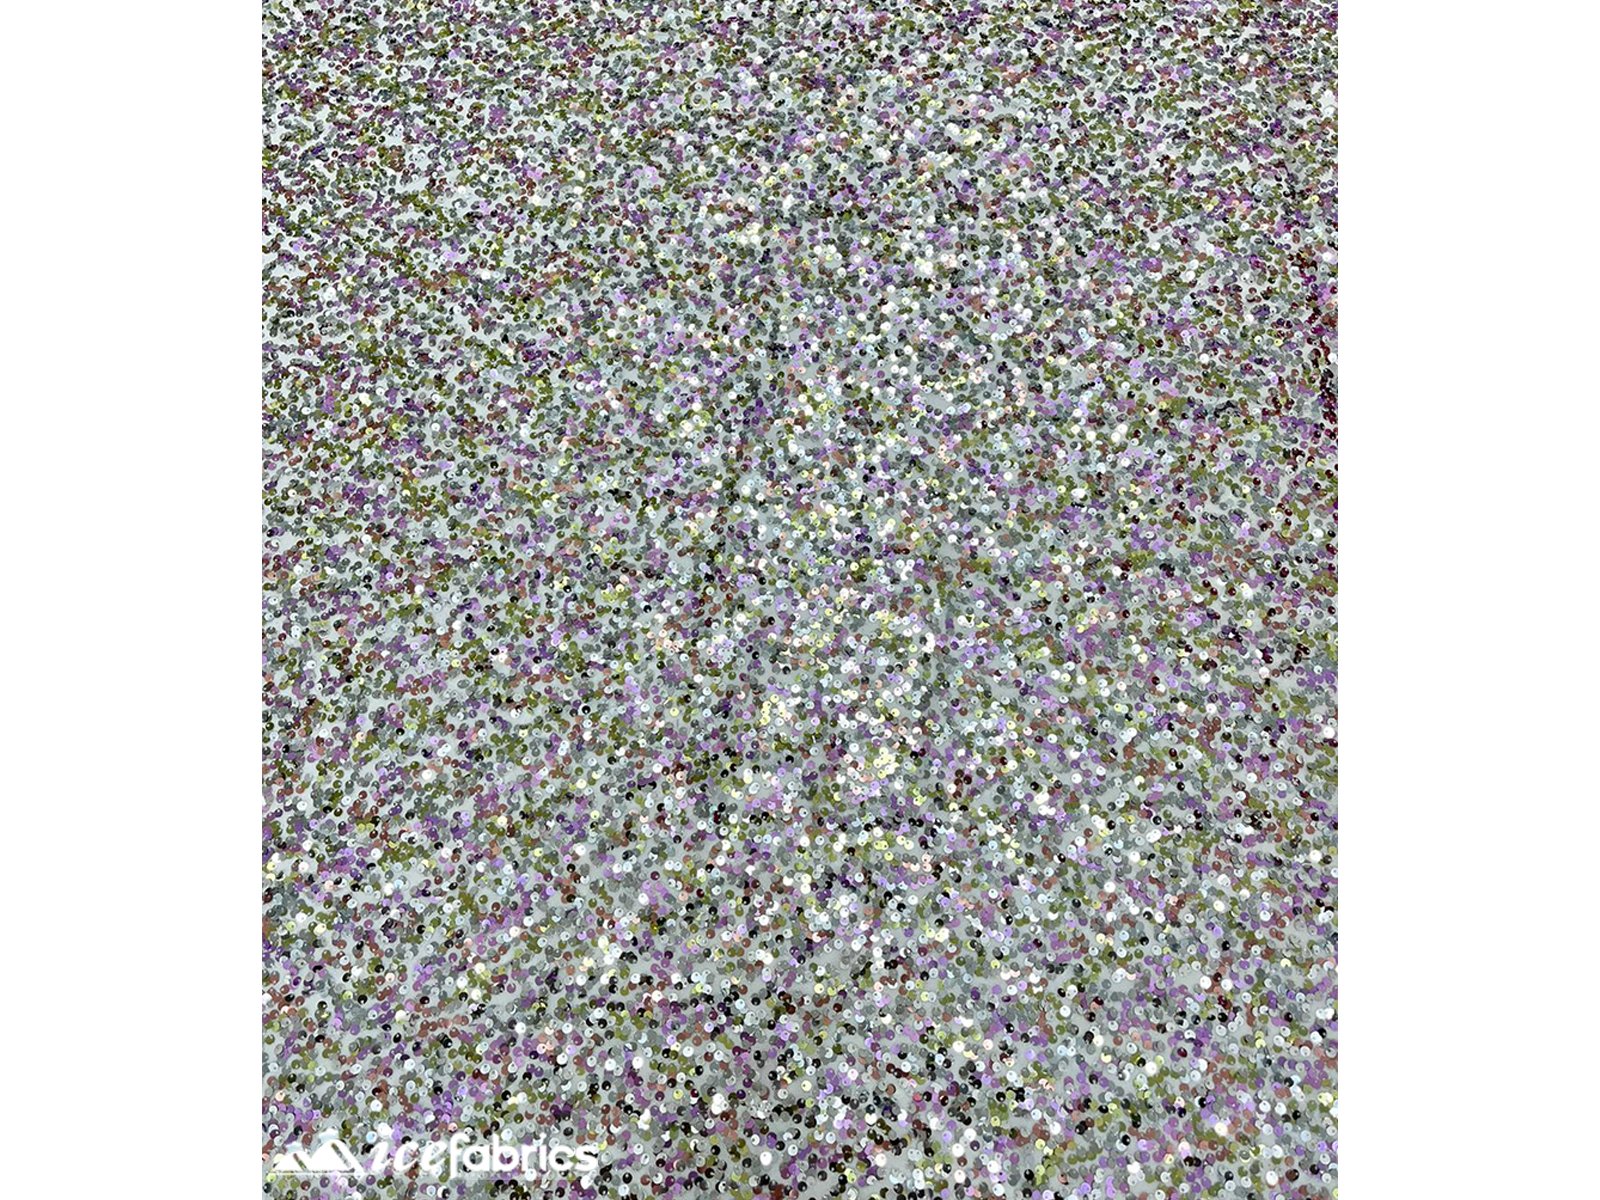 Iridescent Lavender Green 3 Tone 4 Way Stretch Sequin Fabric on White MeshICE FABRICSICE FABRICSBy The Yard (58" Wide)Iridescent Lavender Green 3 Tone 4 Way Stretch Sequin Fabric on White Mesh ICE FABRICS